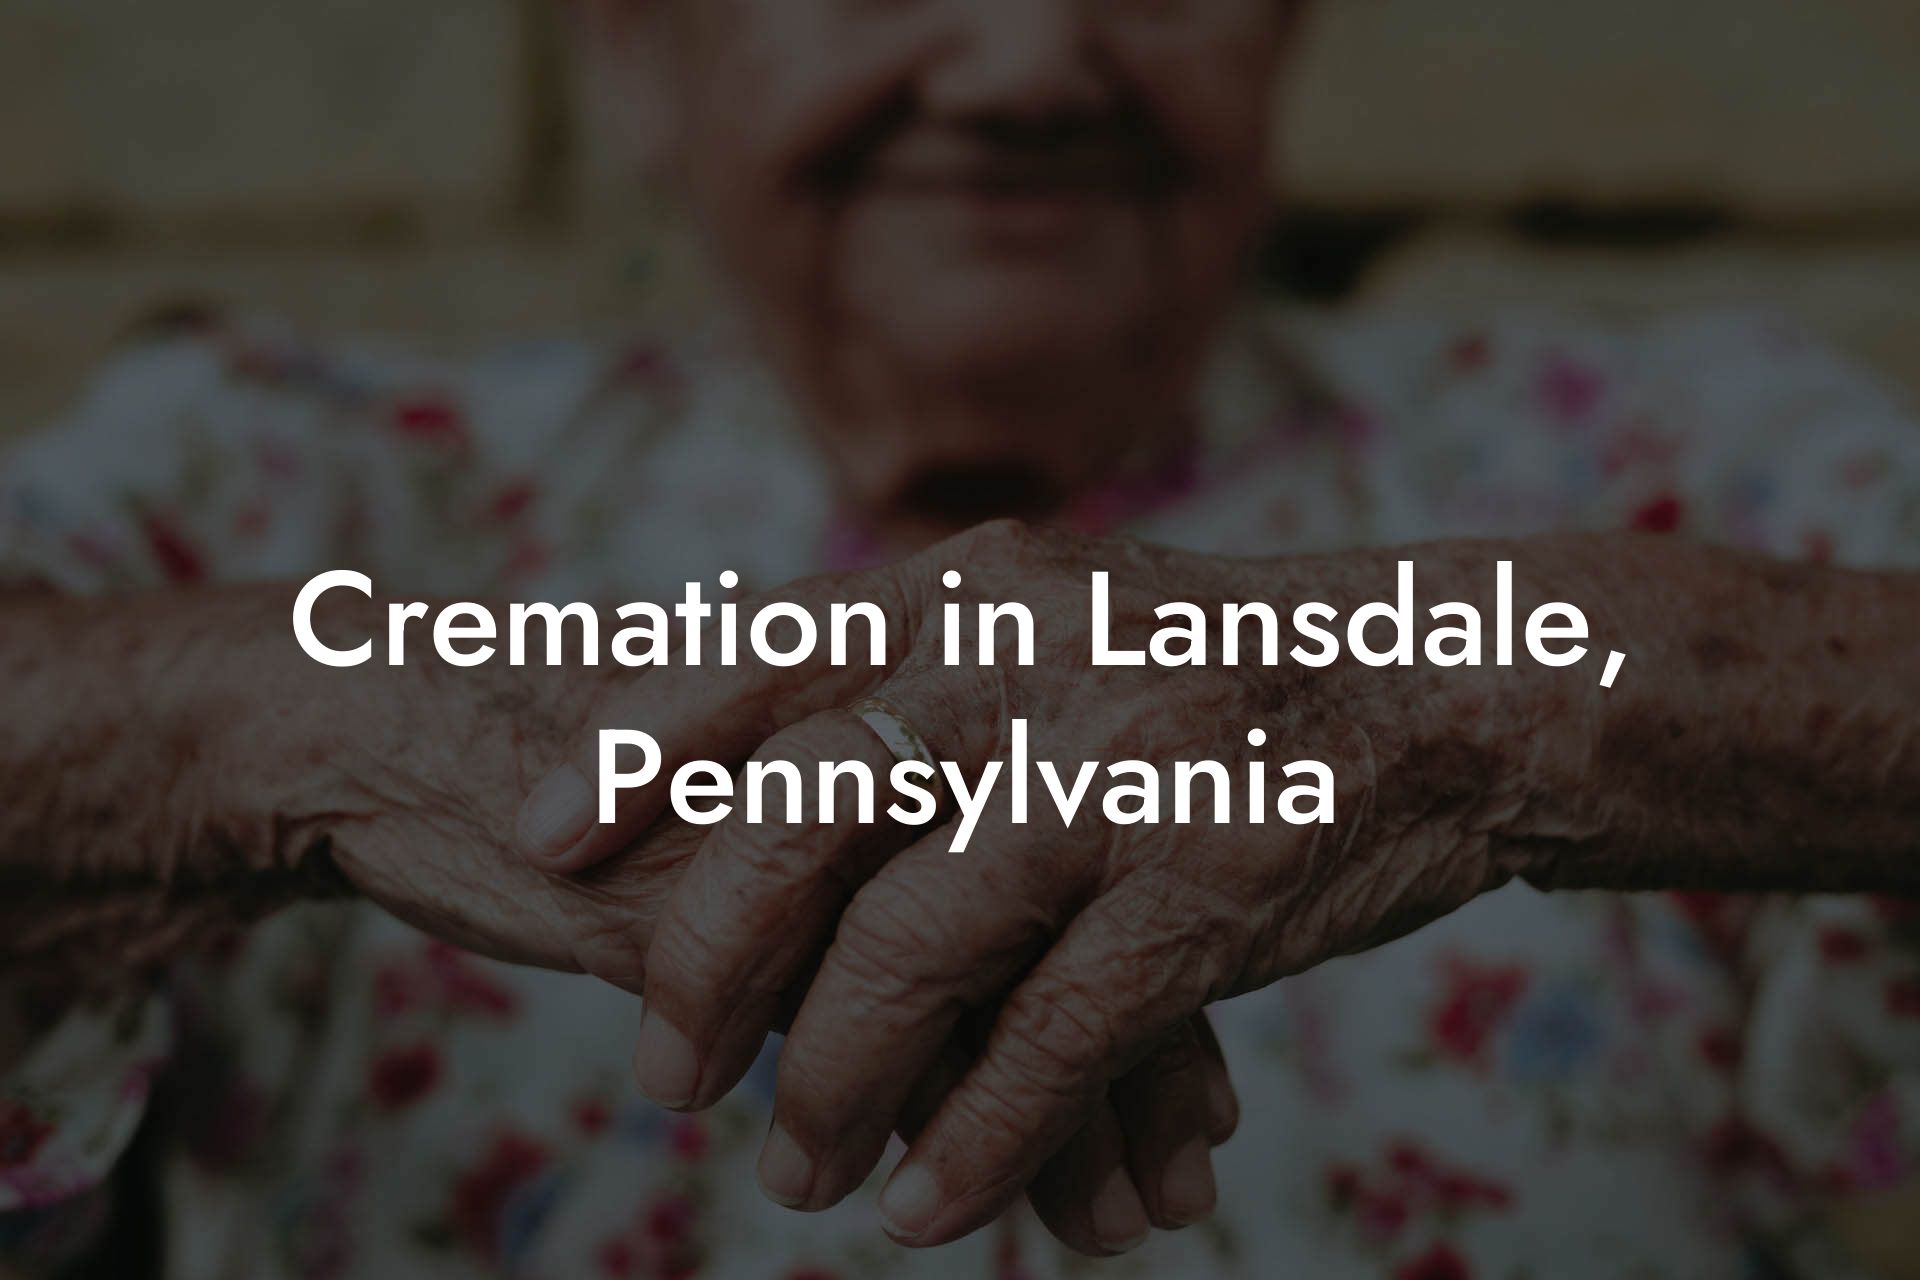 Cremation in Lansdale, Pennsylvania